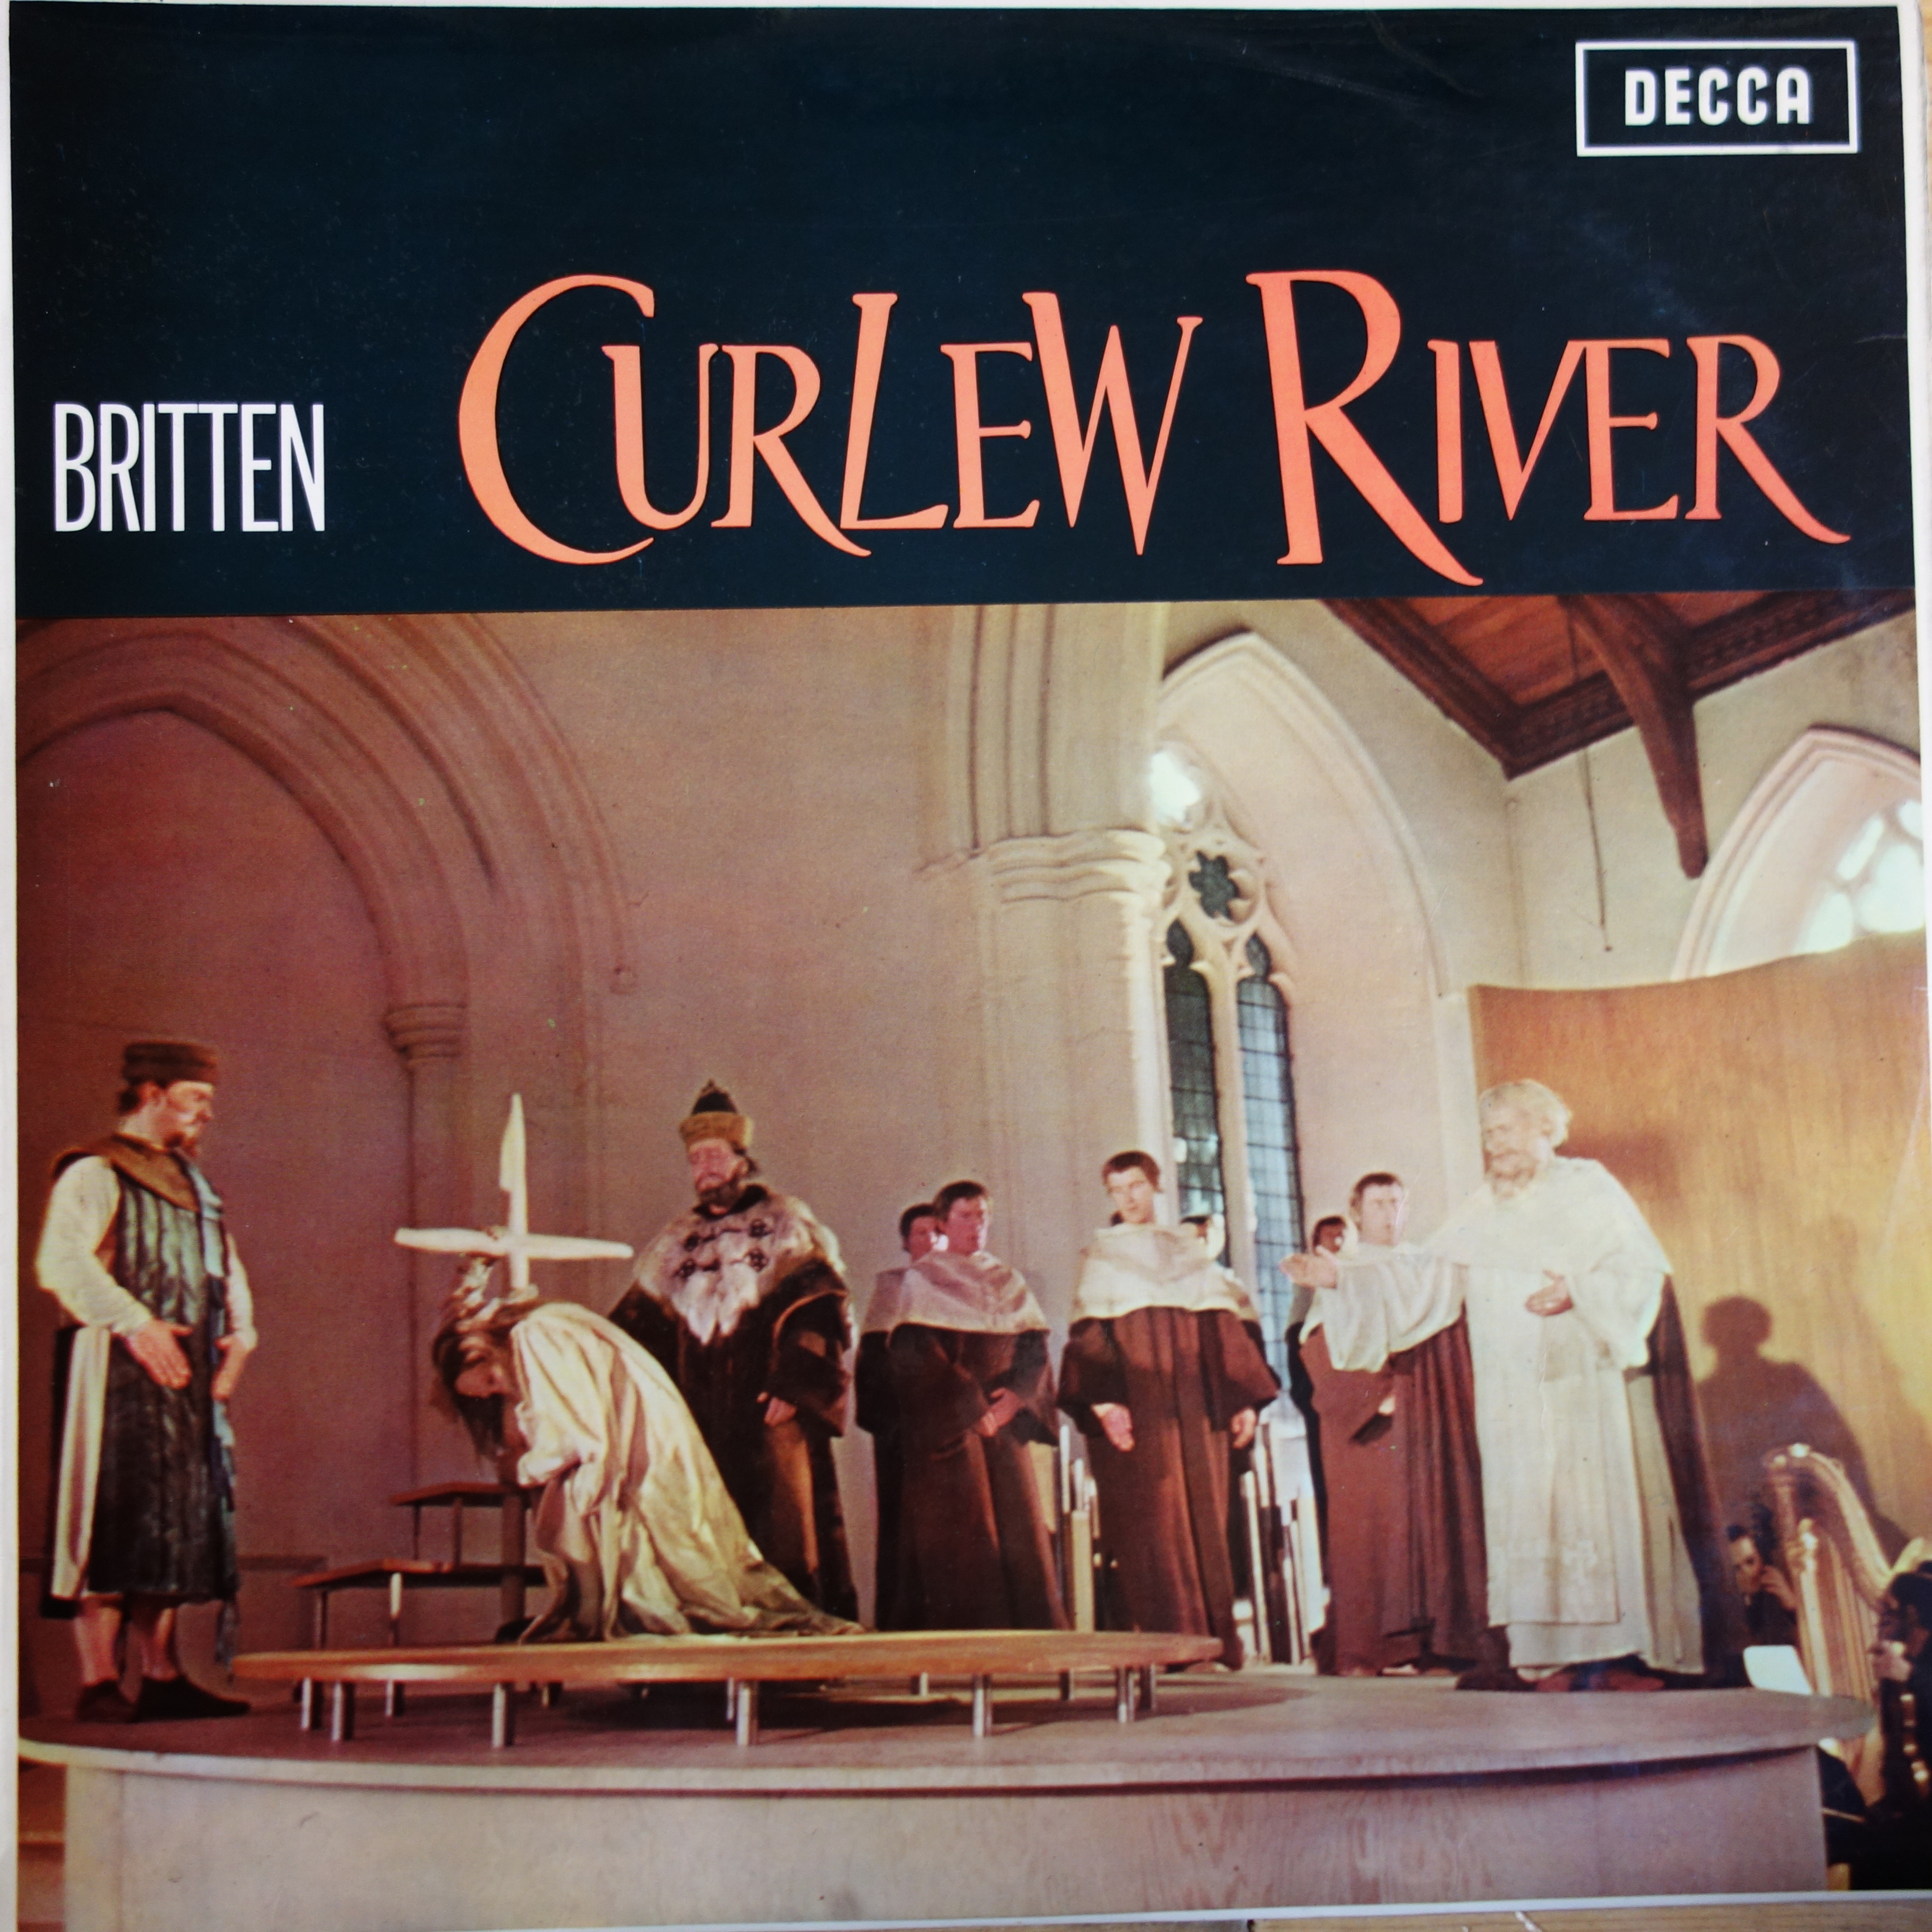 SET 301 Britten Curlew River / Pears / Shirley-Quirk etc. W/B